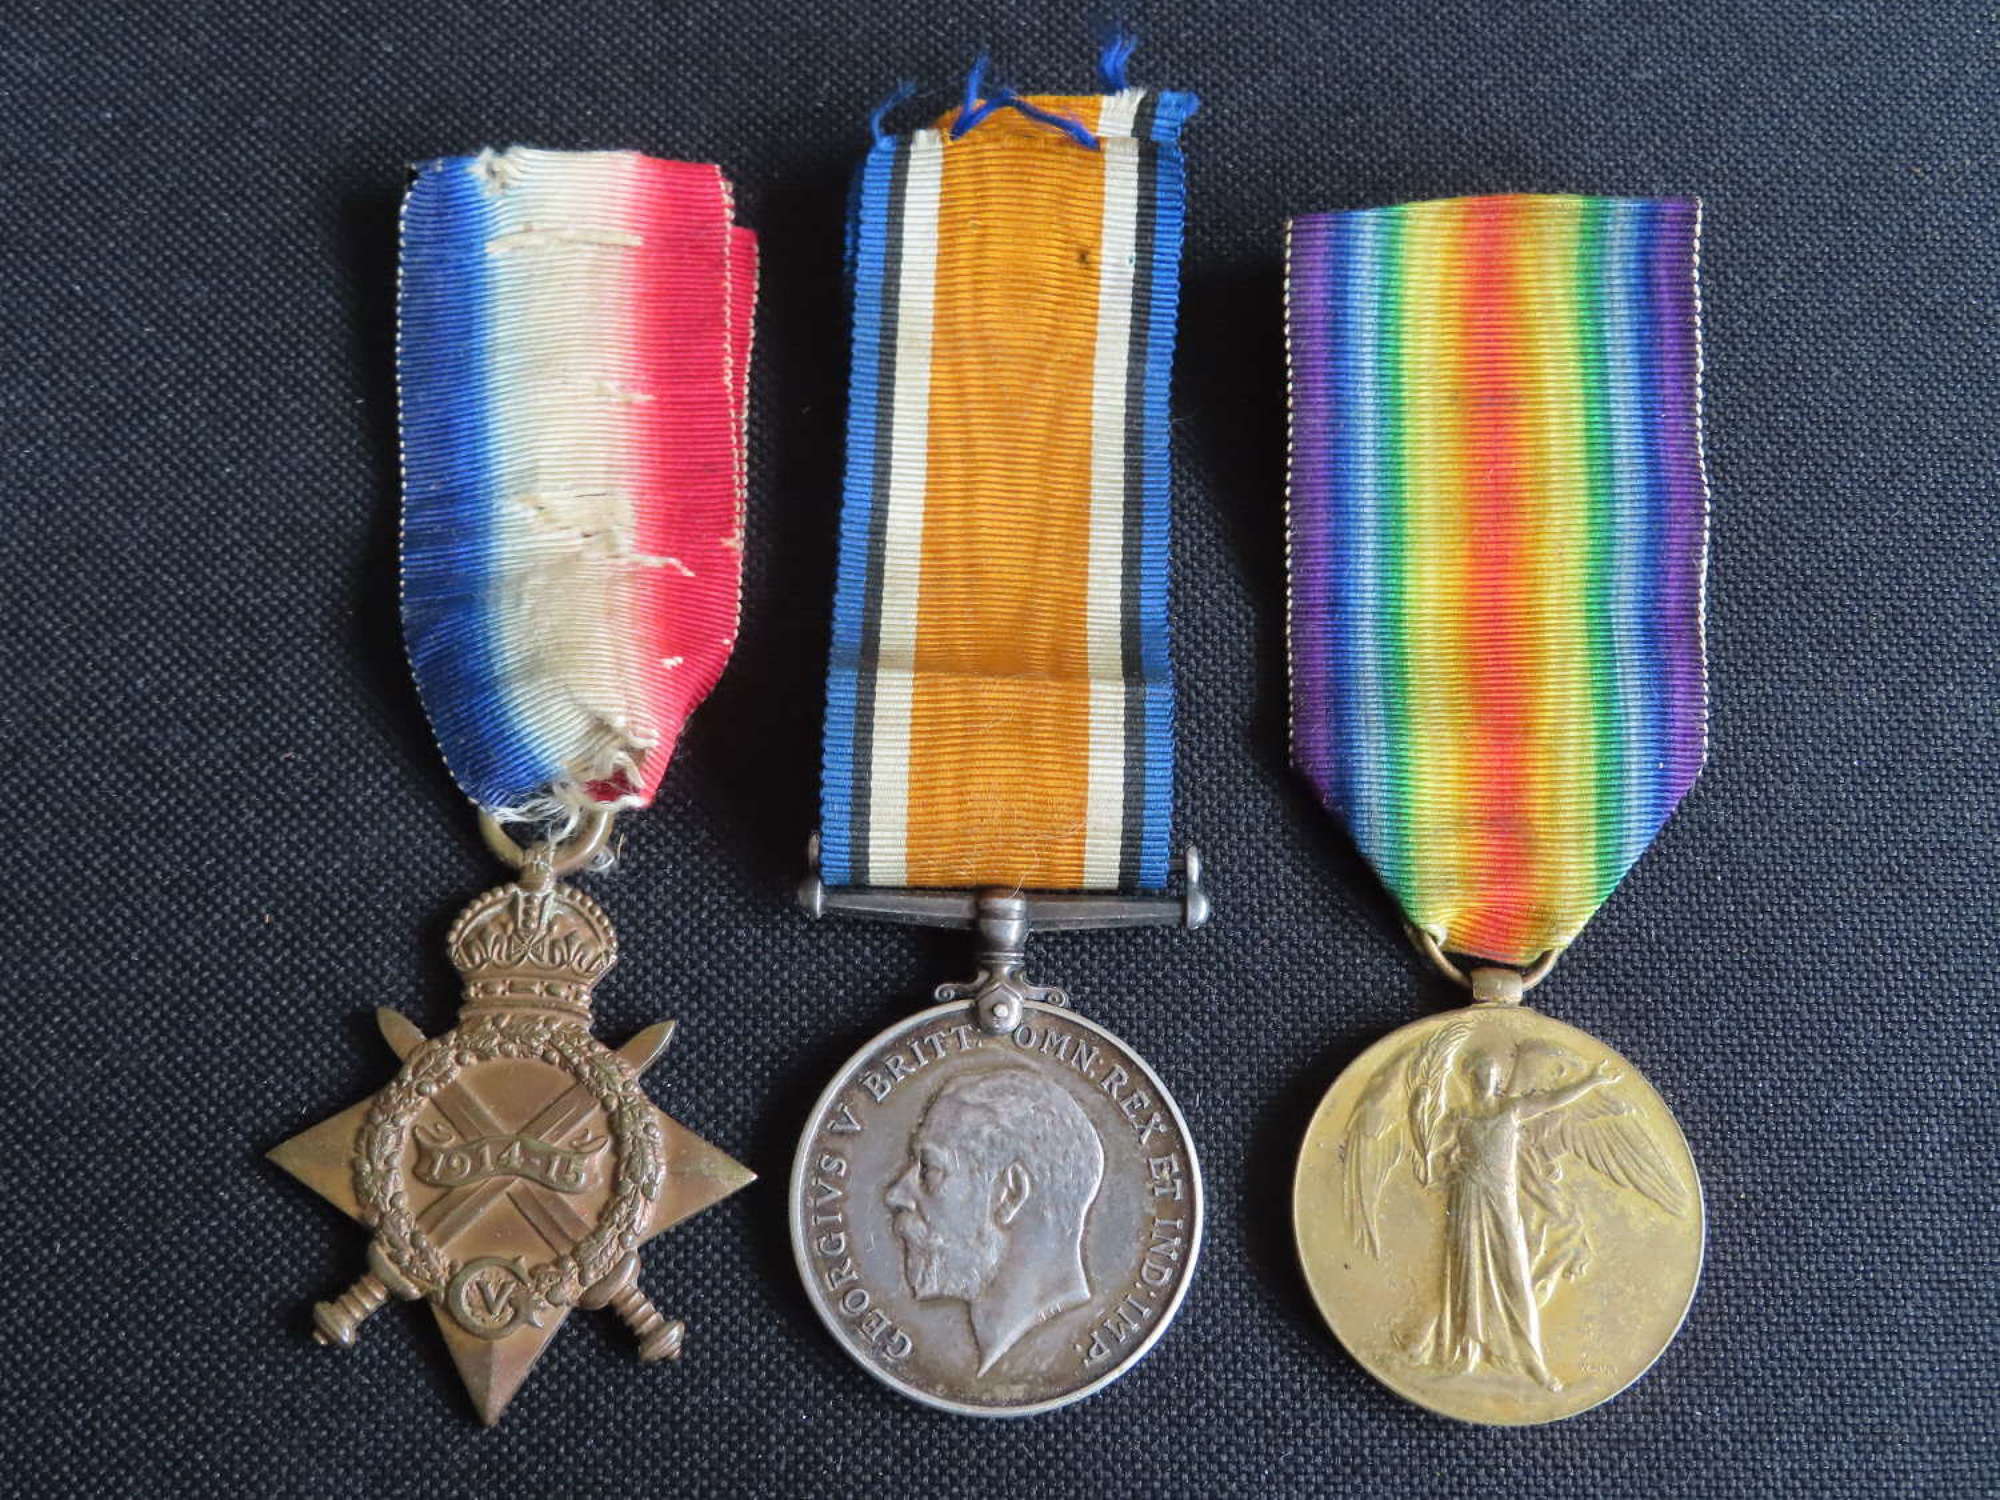 WW1 1914-15 Trio of Medals - Pte Bumpstead Coldstream Guards - Wounded